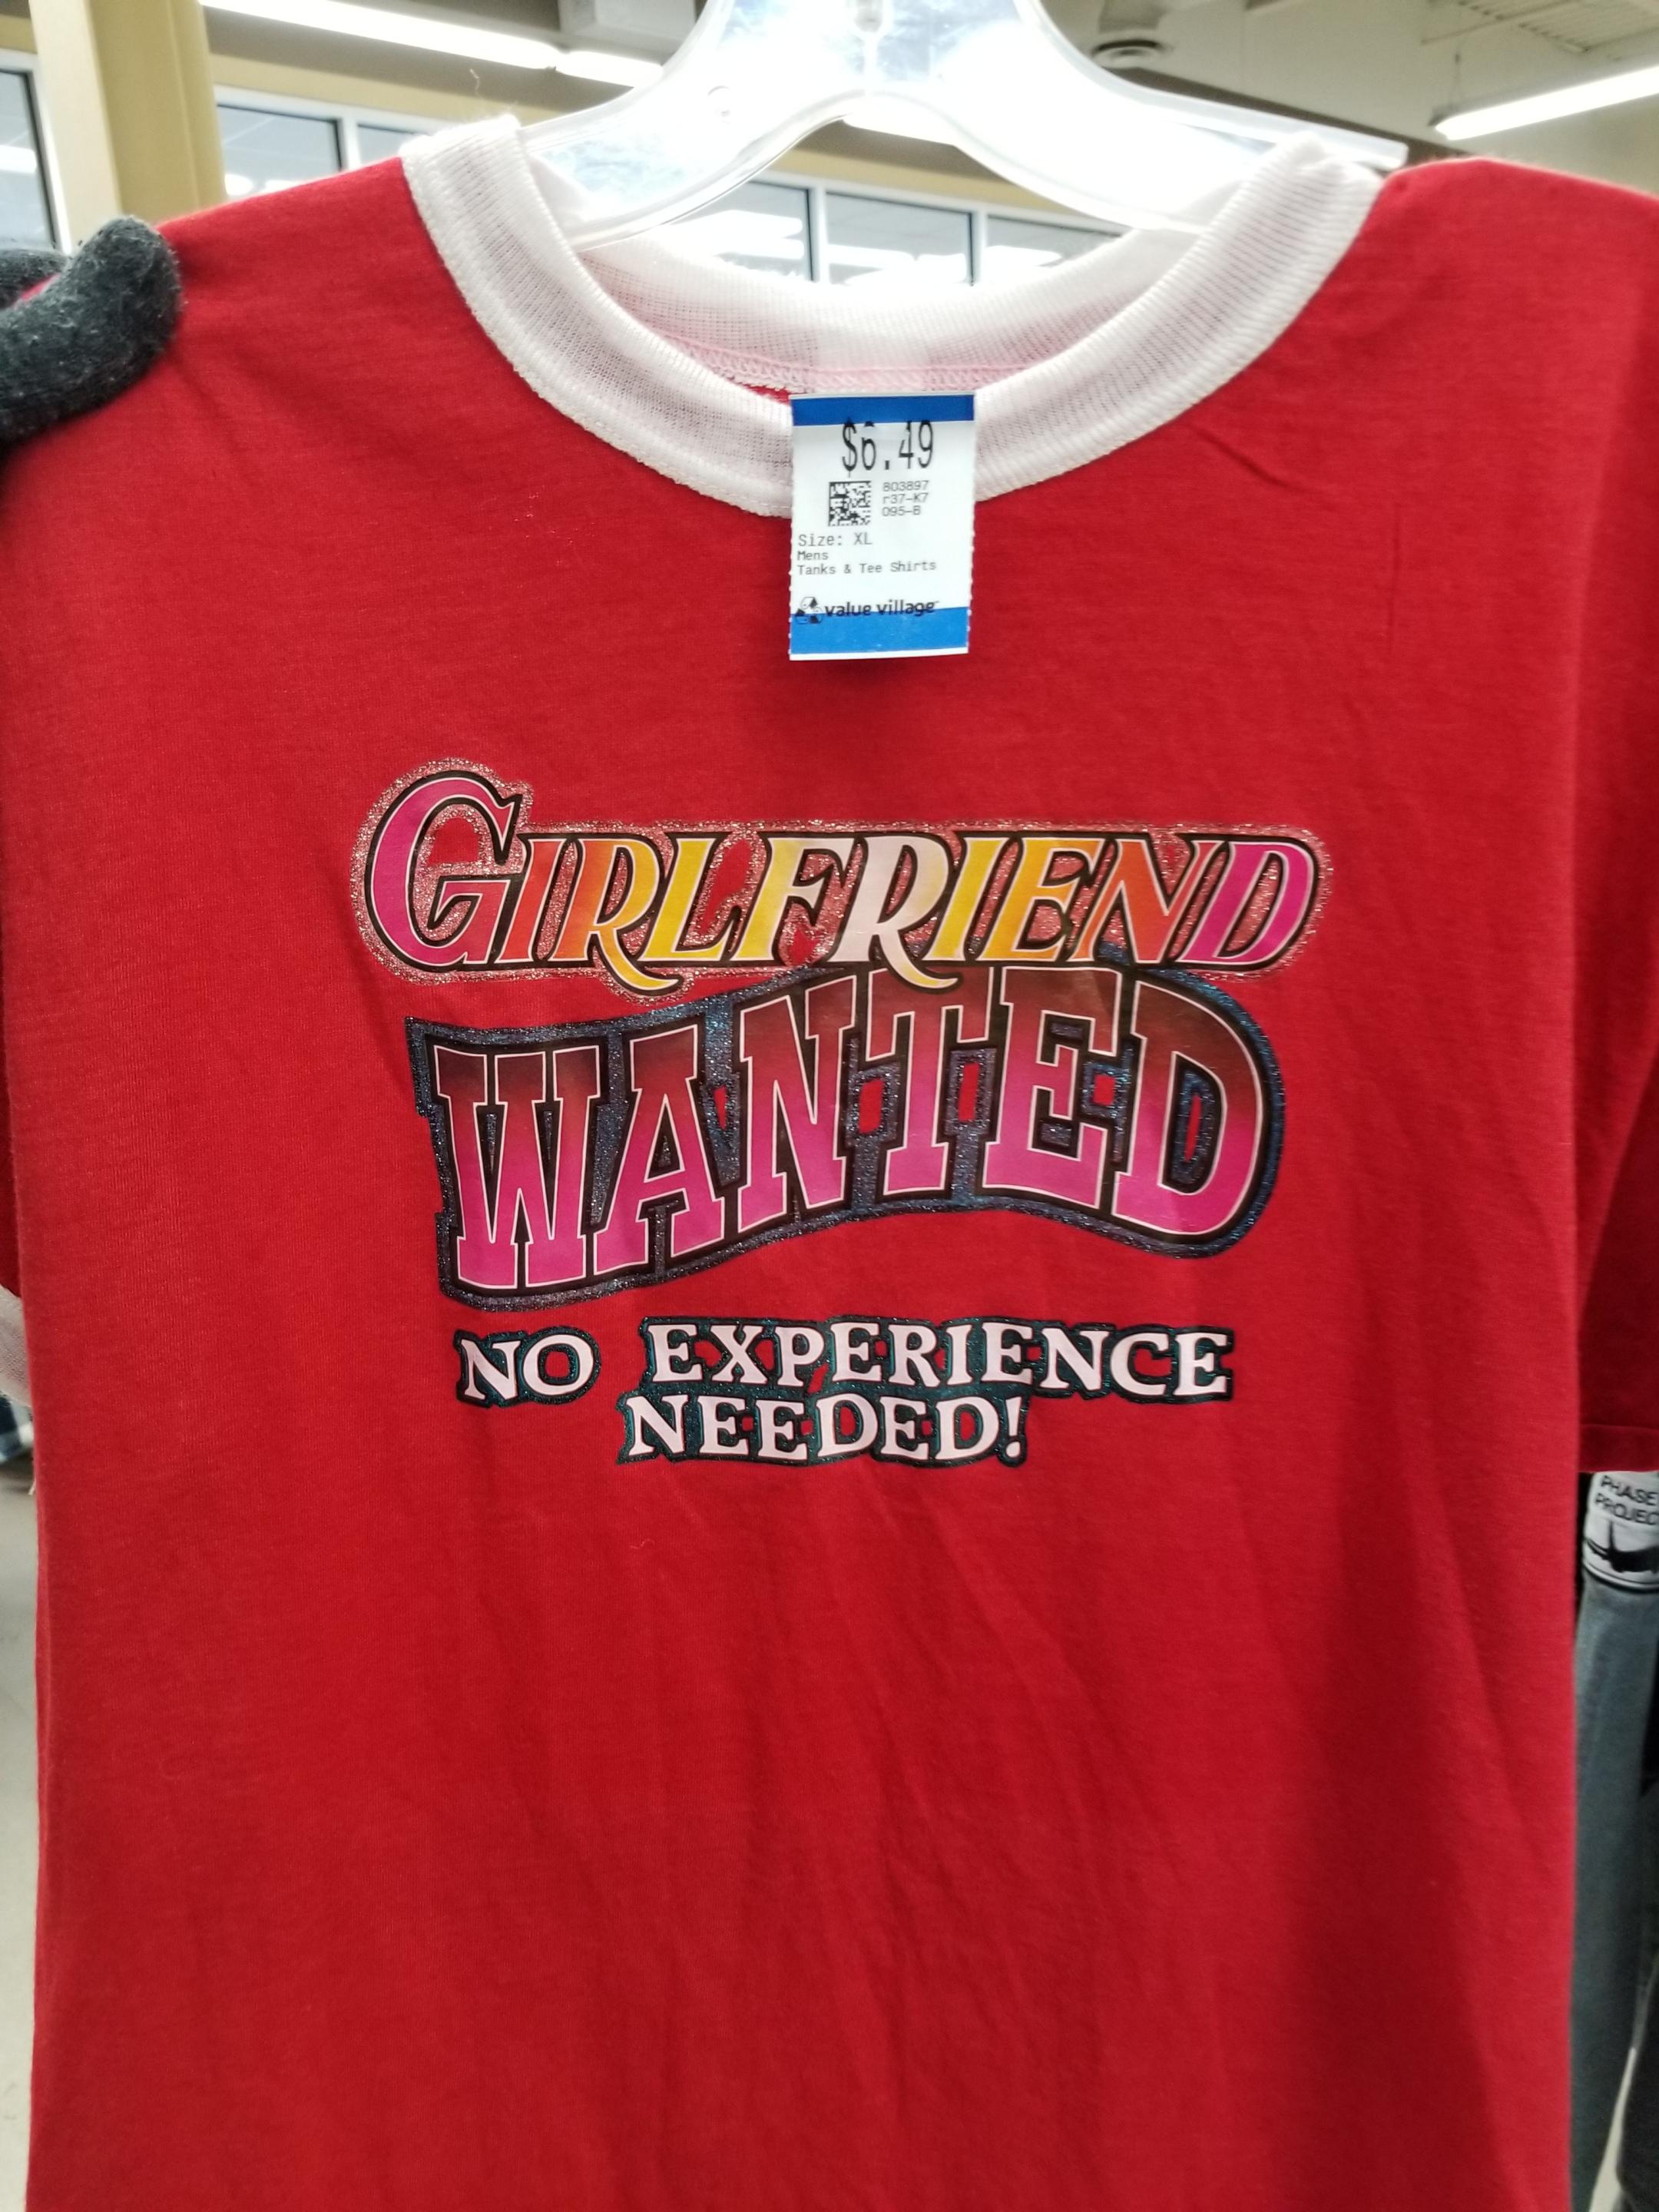 t shirt - S0.49 Girlfriend Wanted No Experience Needed!